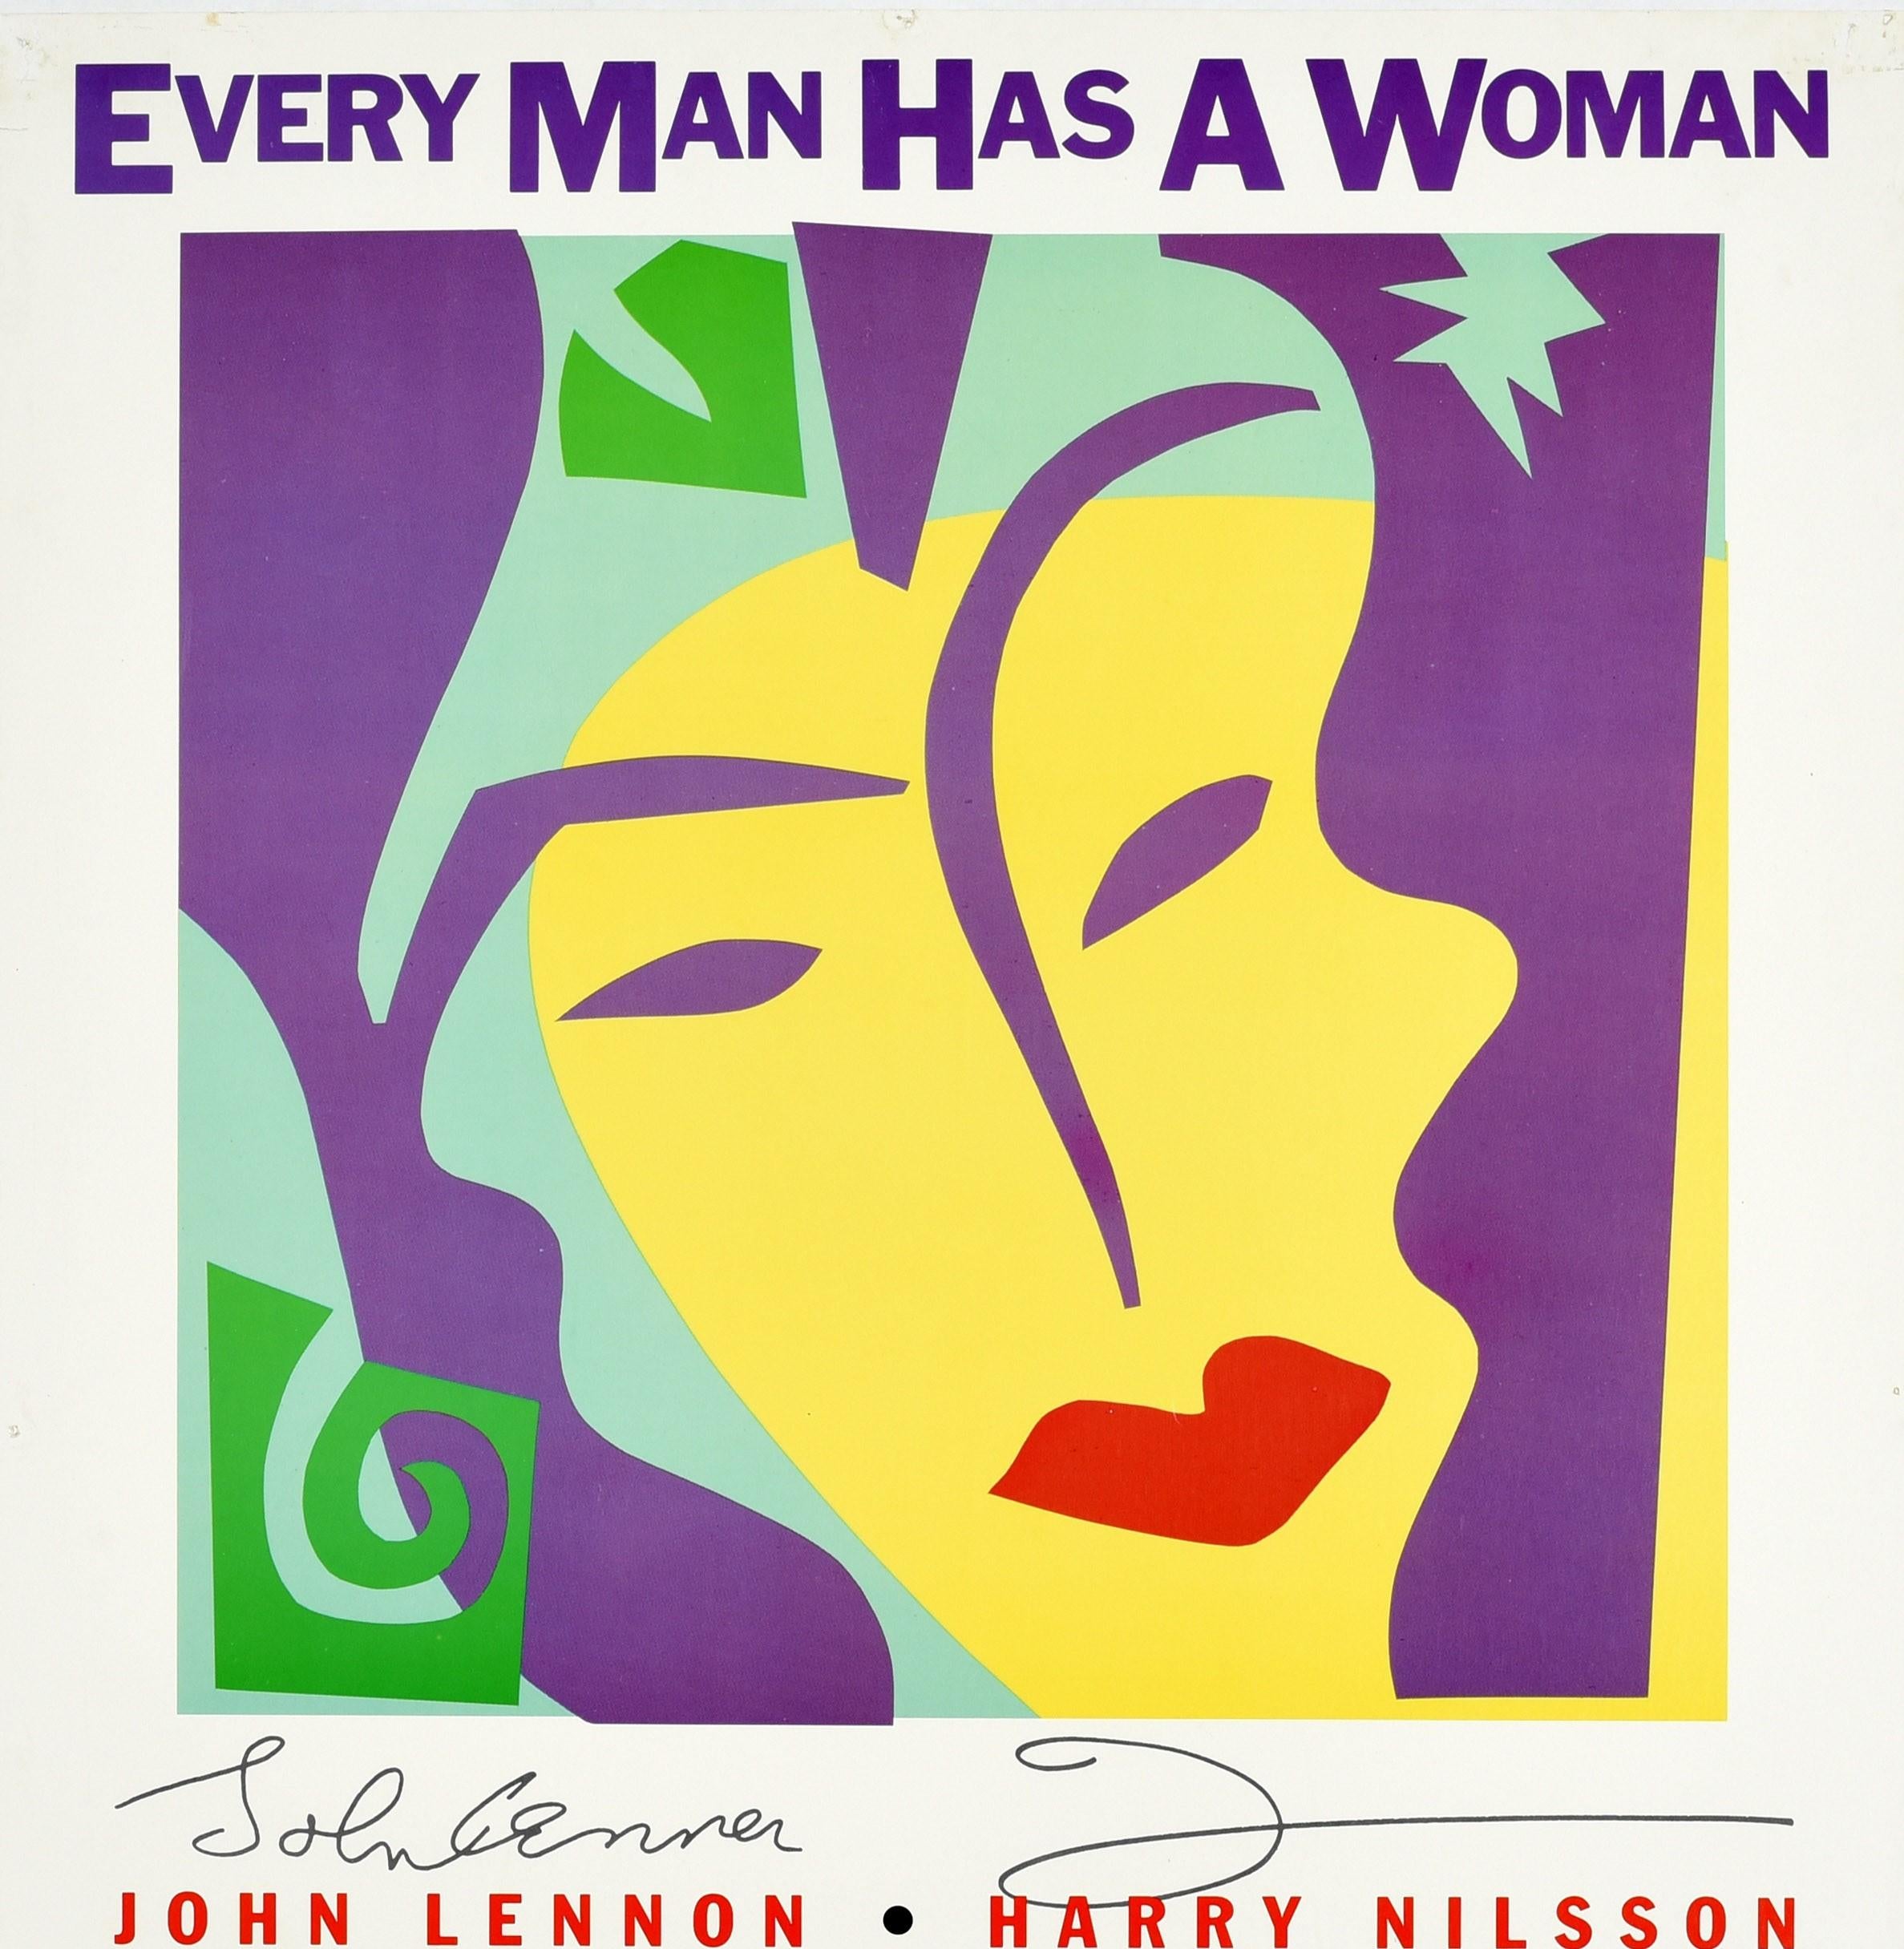 Original vintage music advertising poster for a tribute album Every Man Has A Woman compiled by John Lennon for Yoko Ono on her 50th birthday, released in November 1984 featuring the colourful collage style Grammy nominated cover design by George